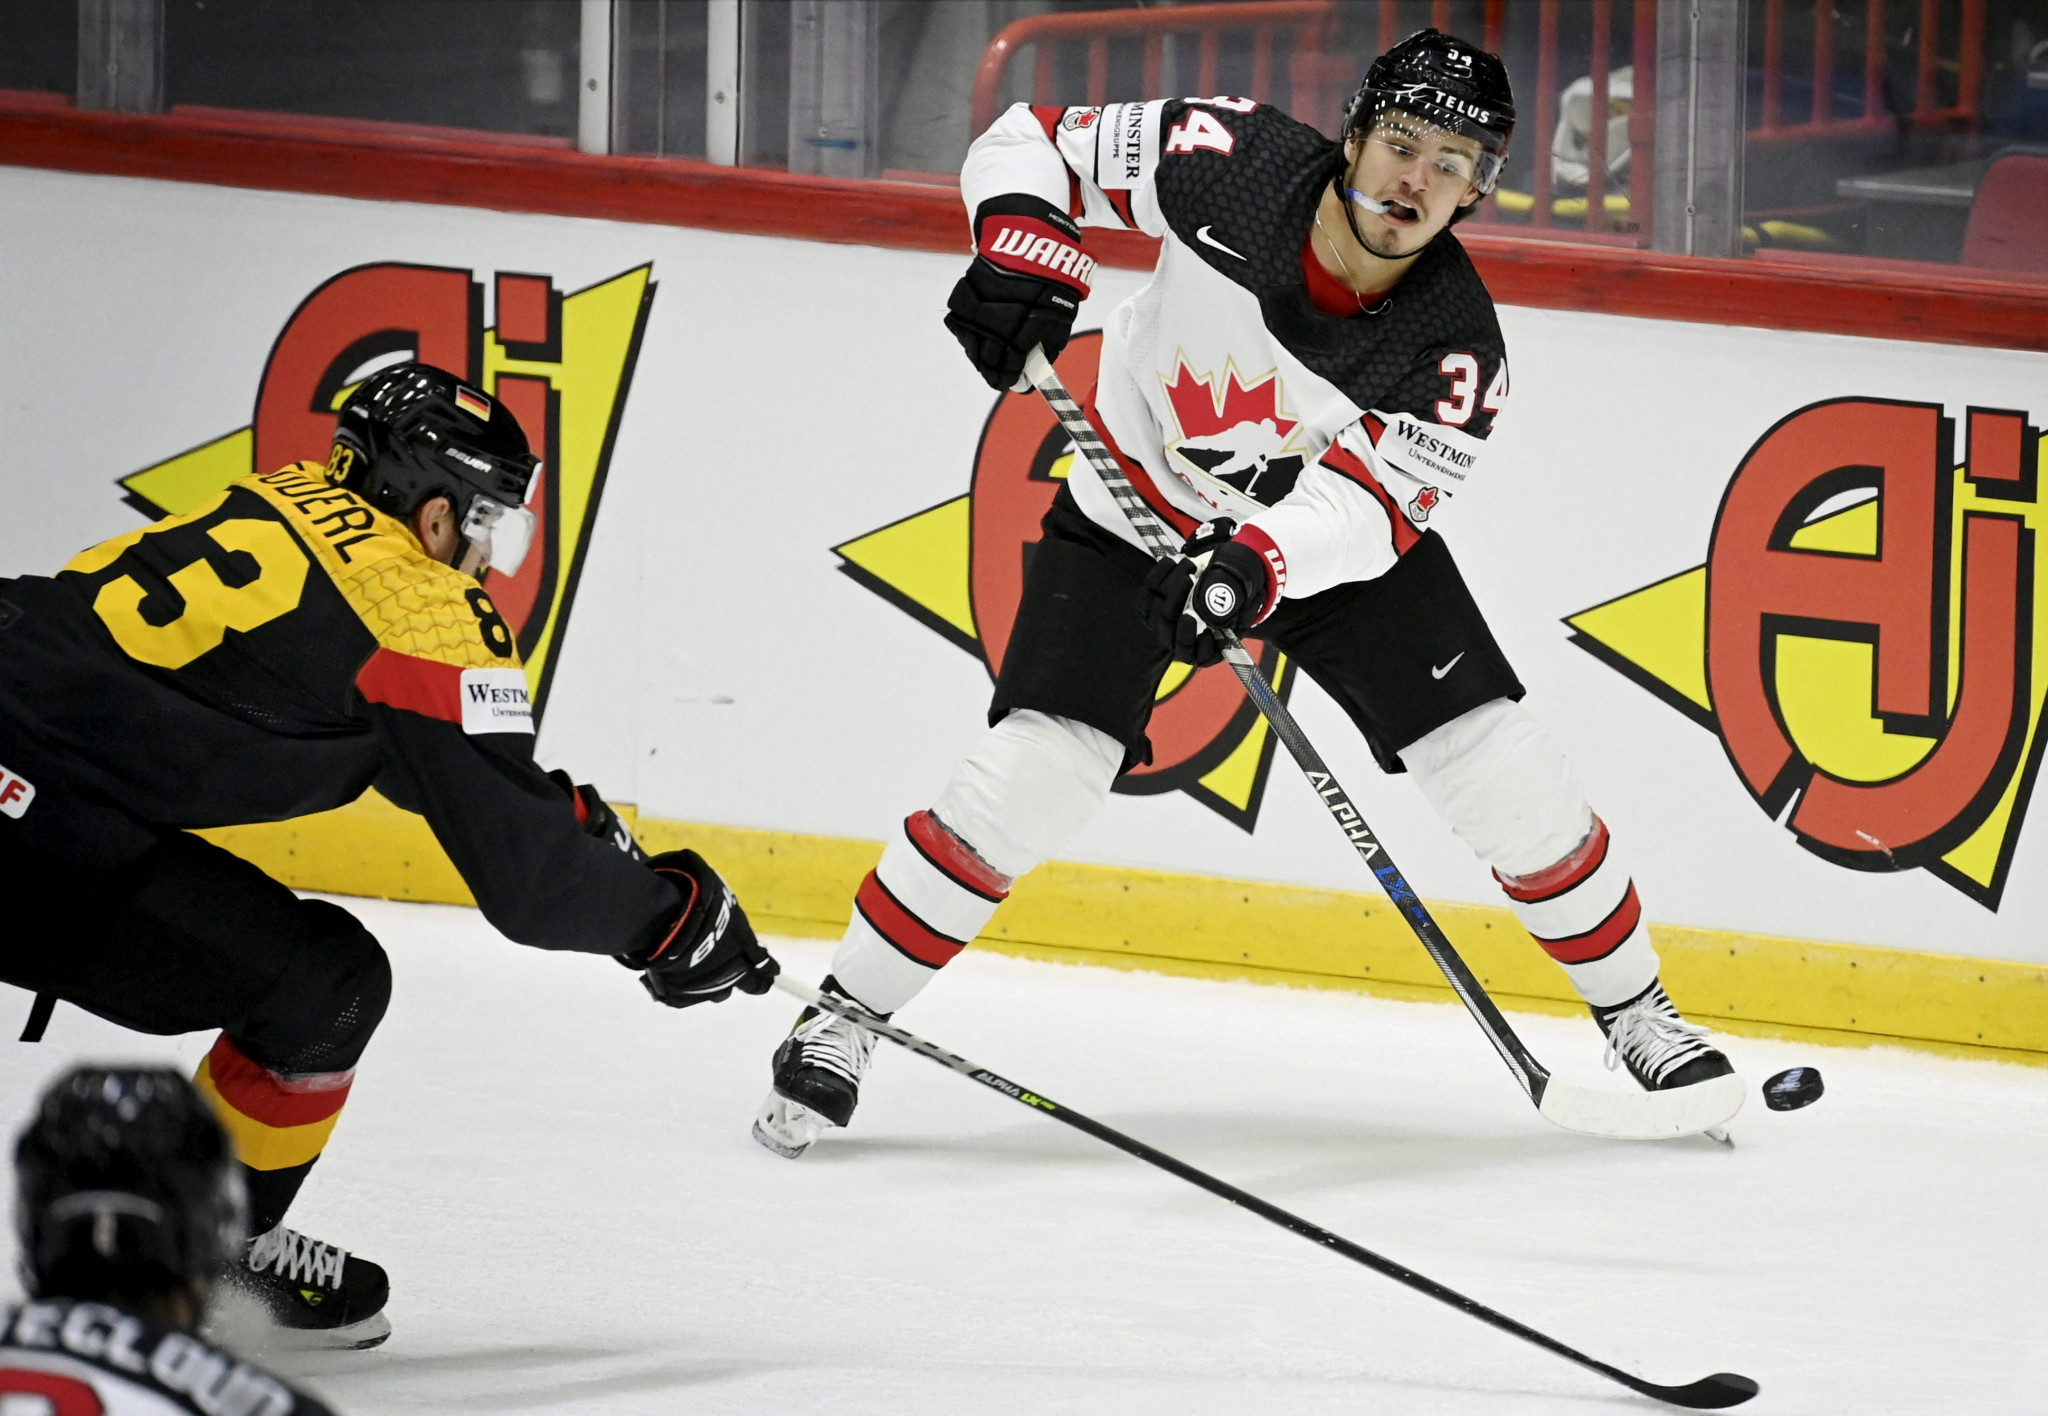 Canada and Finland enjoy opening day wins at Men's IIHF World Championship